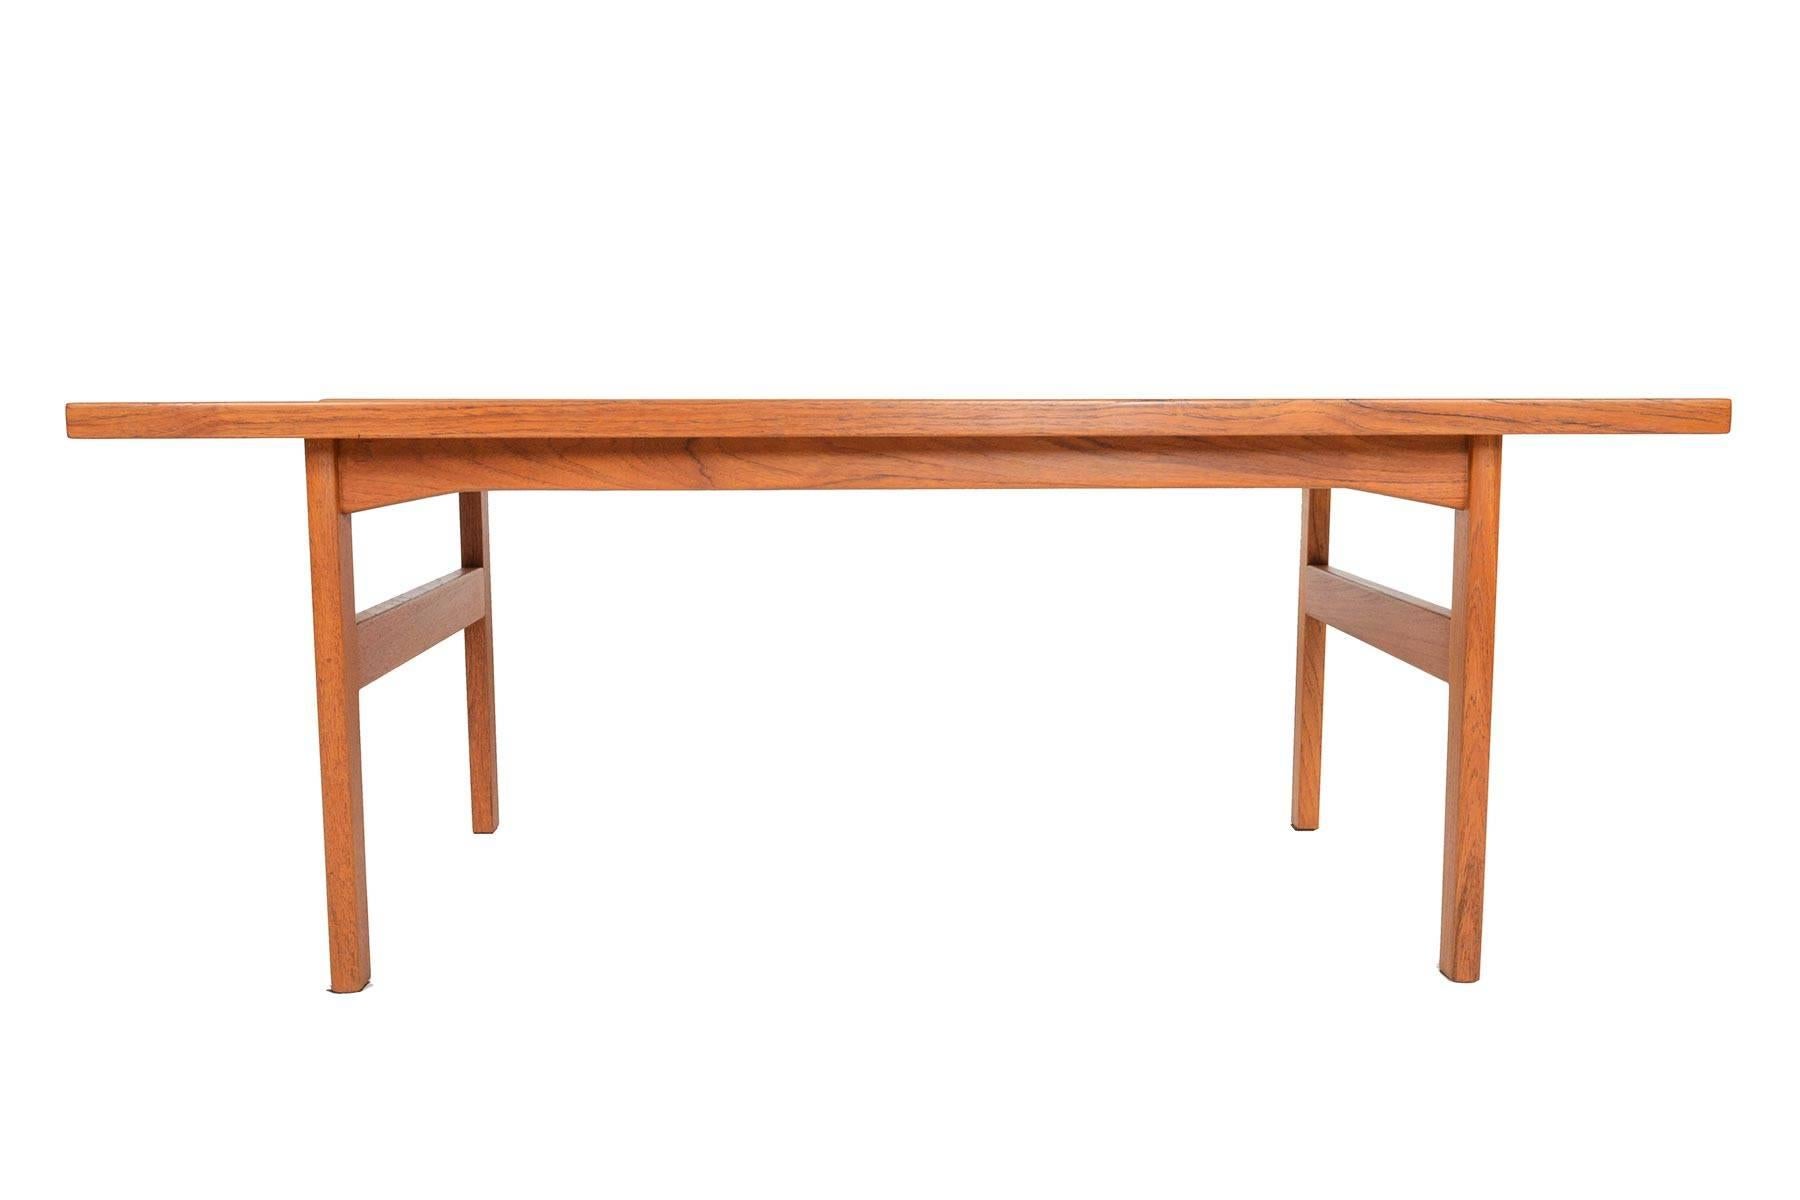 20th Century Refinished Solid Teak Coffee Table by Tove and Edvard Kindt - Larsen